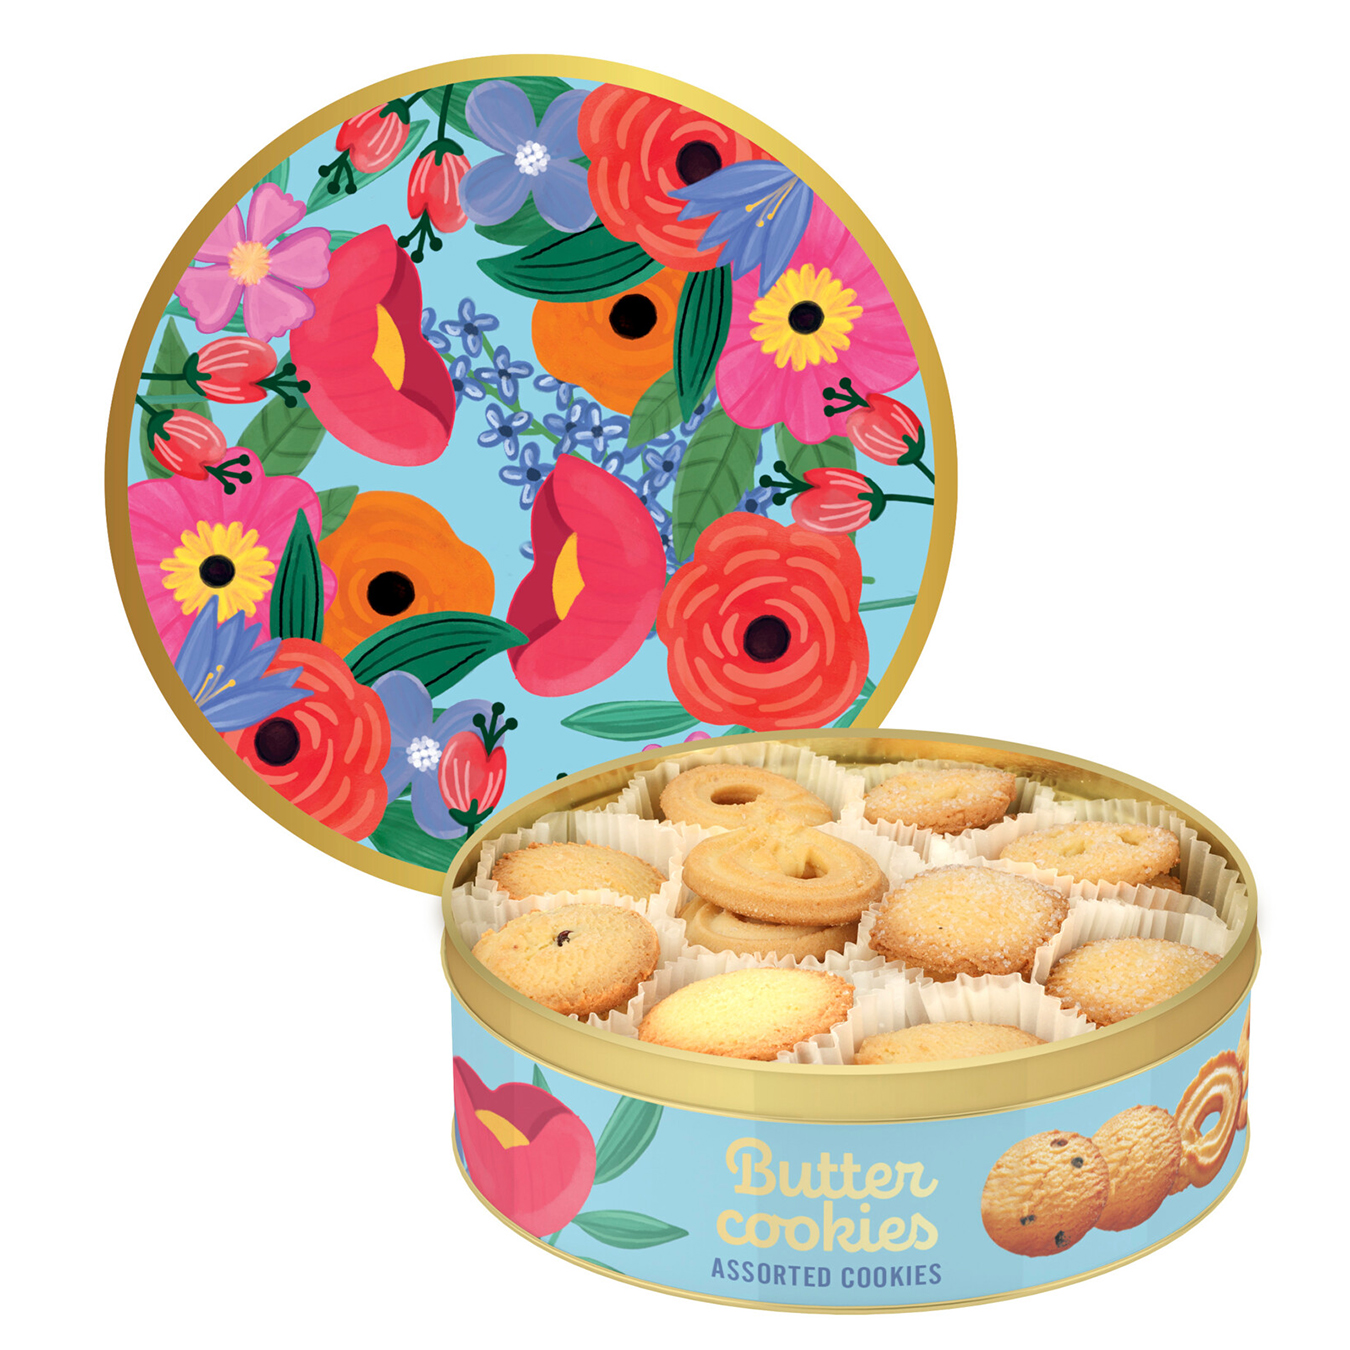 A set of Becky's cookies iron can 340g